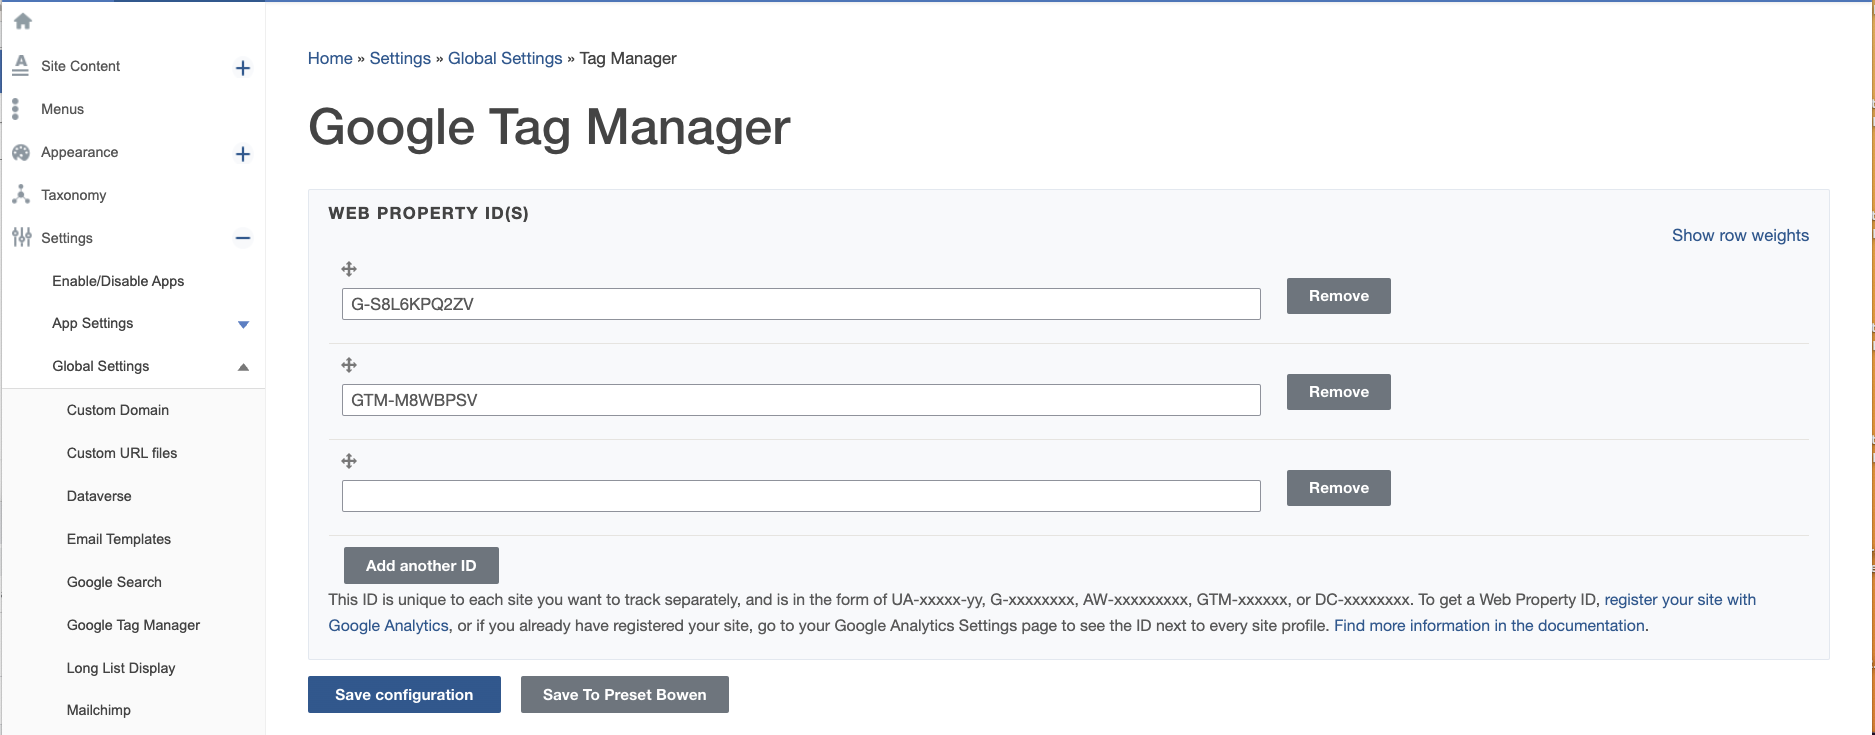 Google Tag Manager settings page